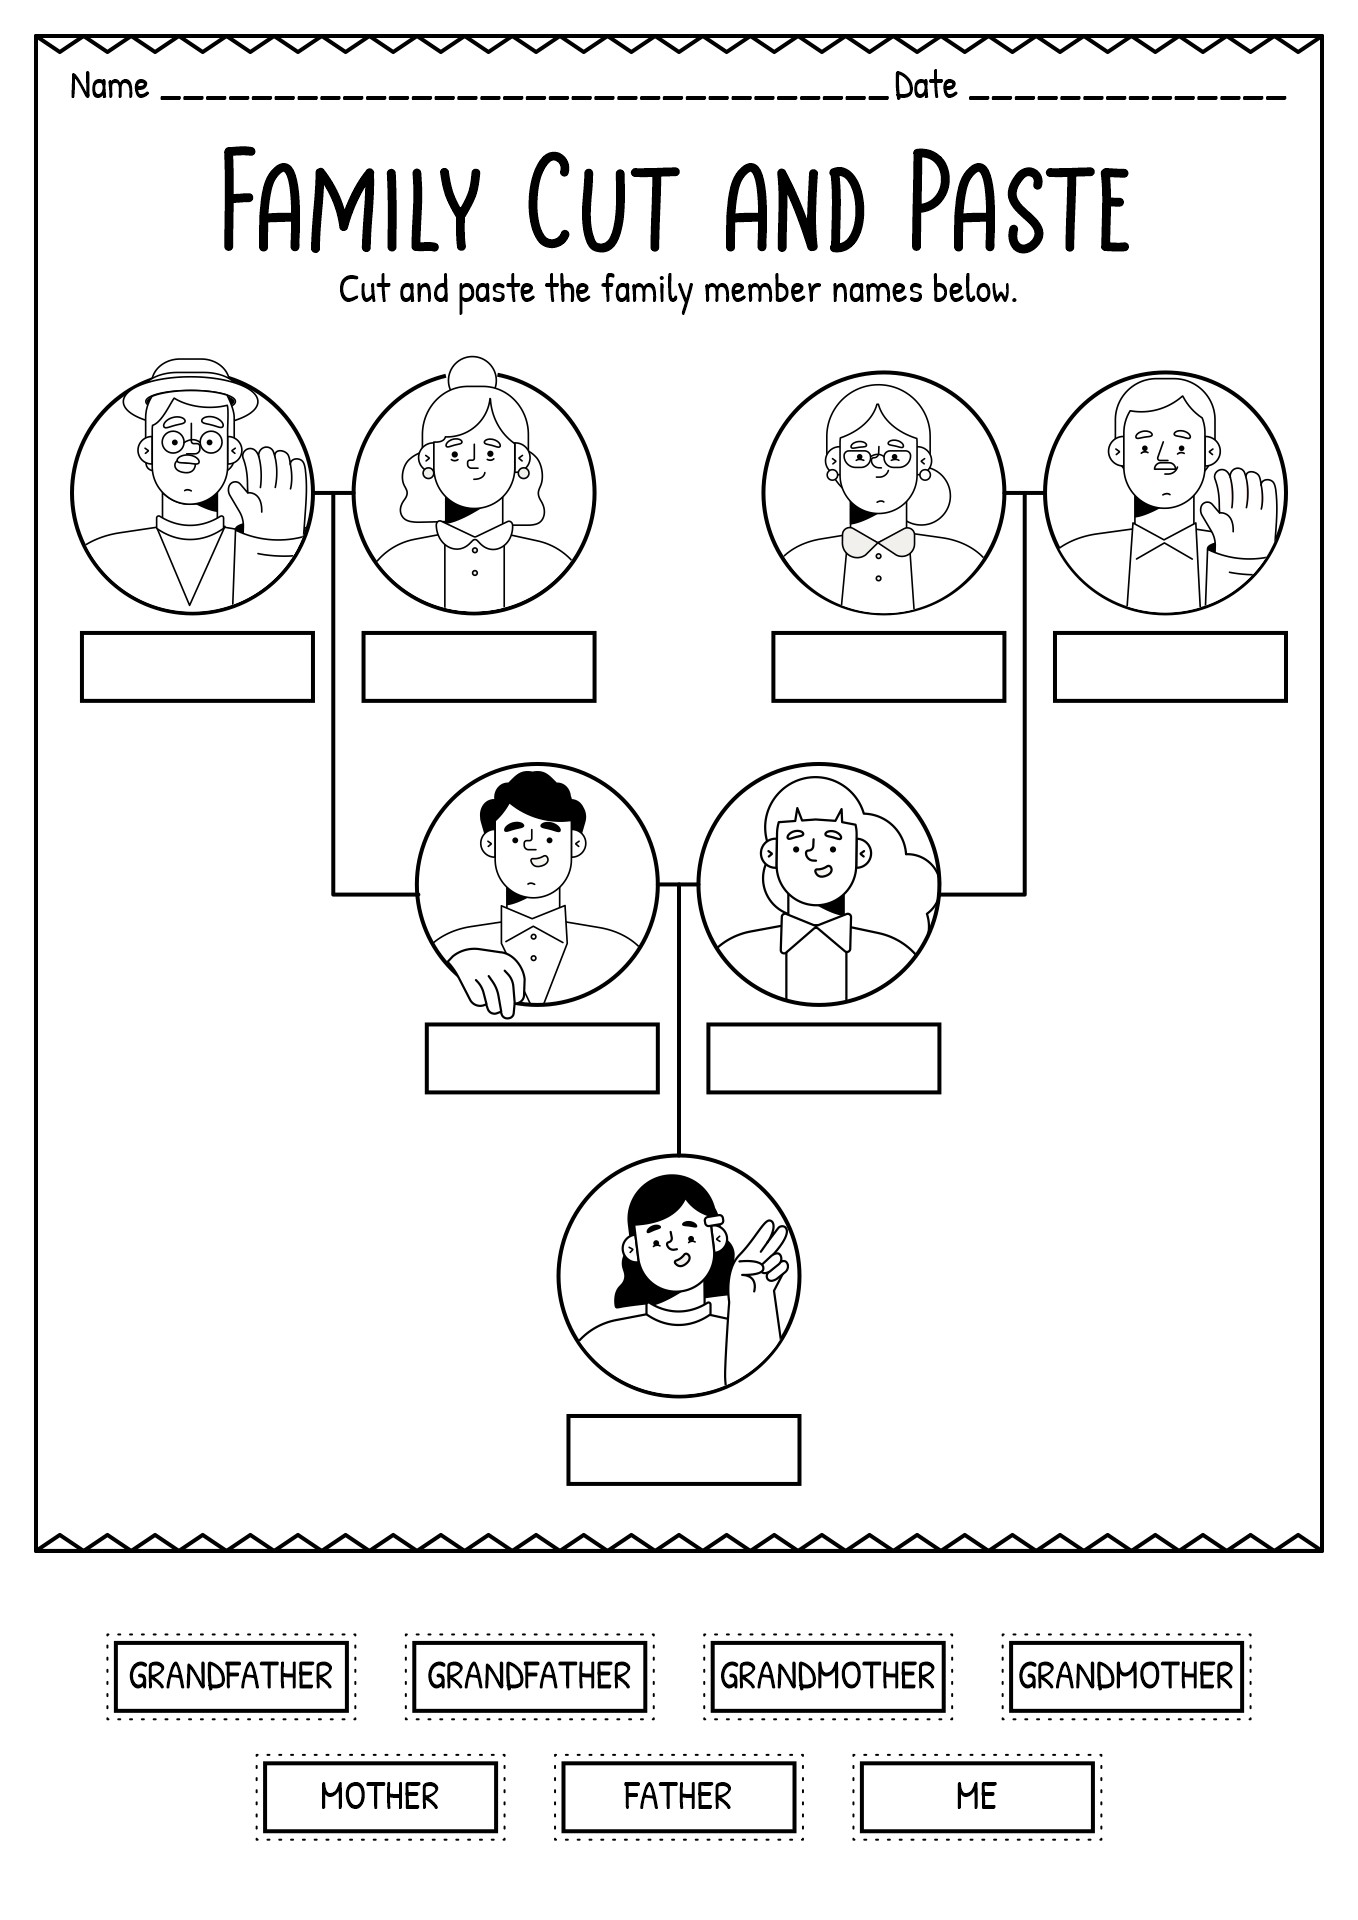 Family Cut and Paste Worksheet Image